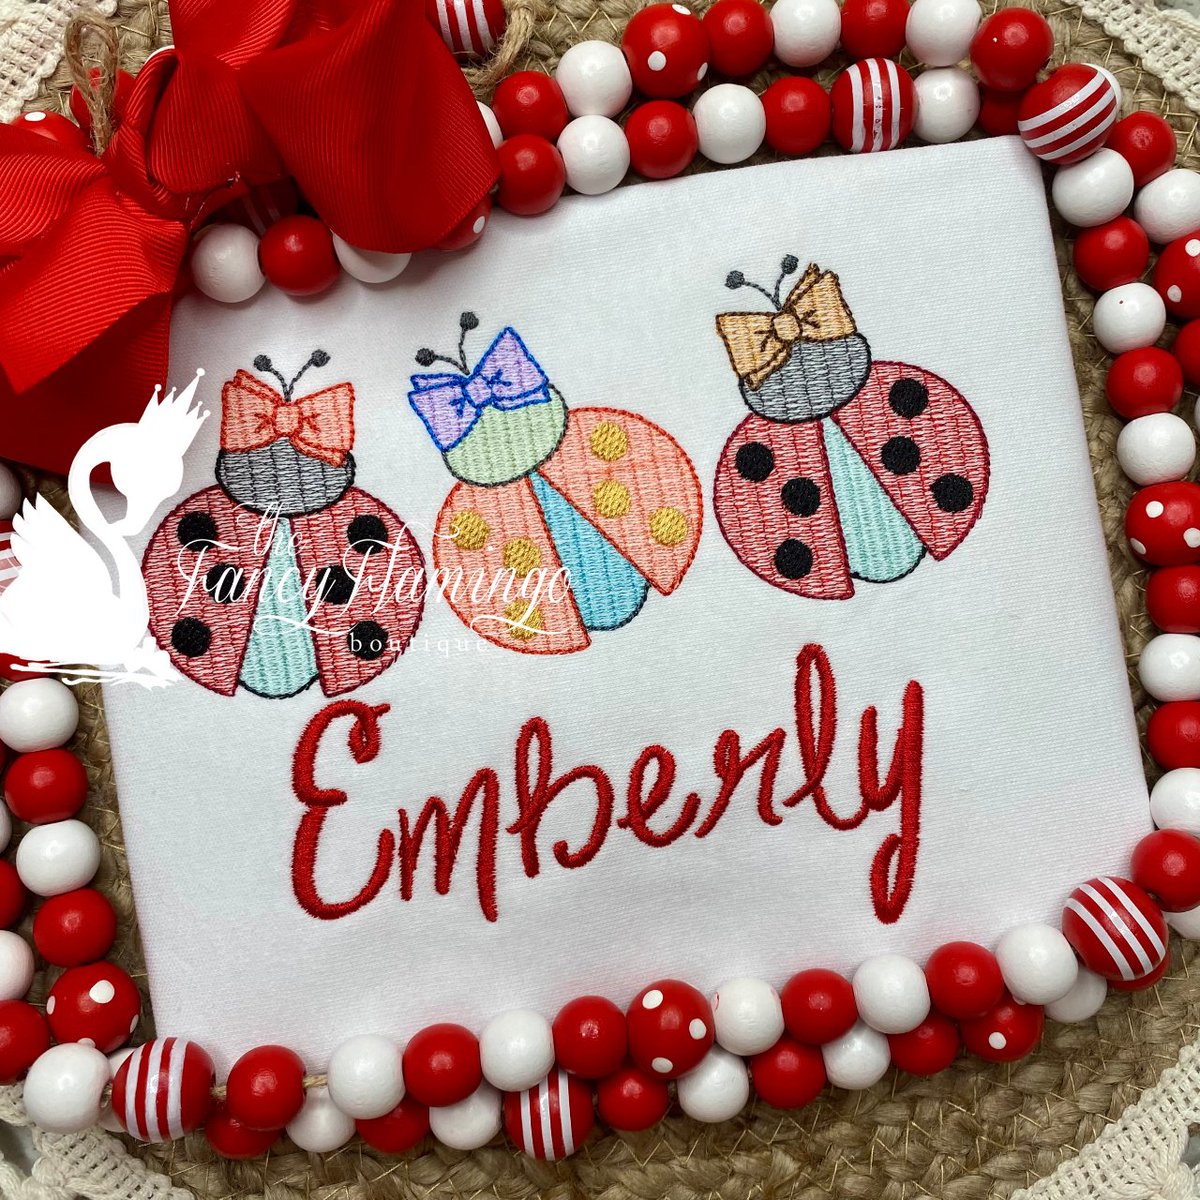 This adorable shirt features a charming ladybug trio with bows, skillfully embroidered to create a personalized sketch just for your little girl.  # #ladybug #ladybugparty #ladybuggirl #machineembroidery #personalizedclothing #personalizedgifts #jacksonvillemoms